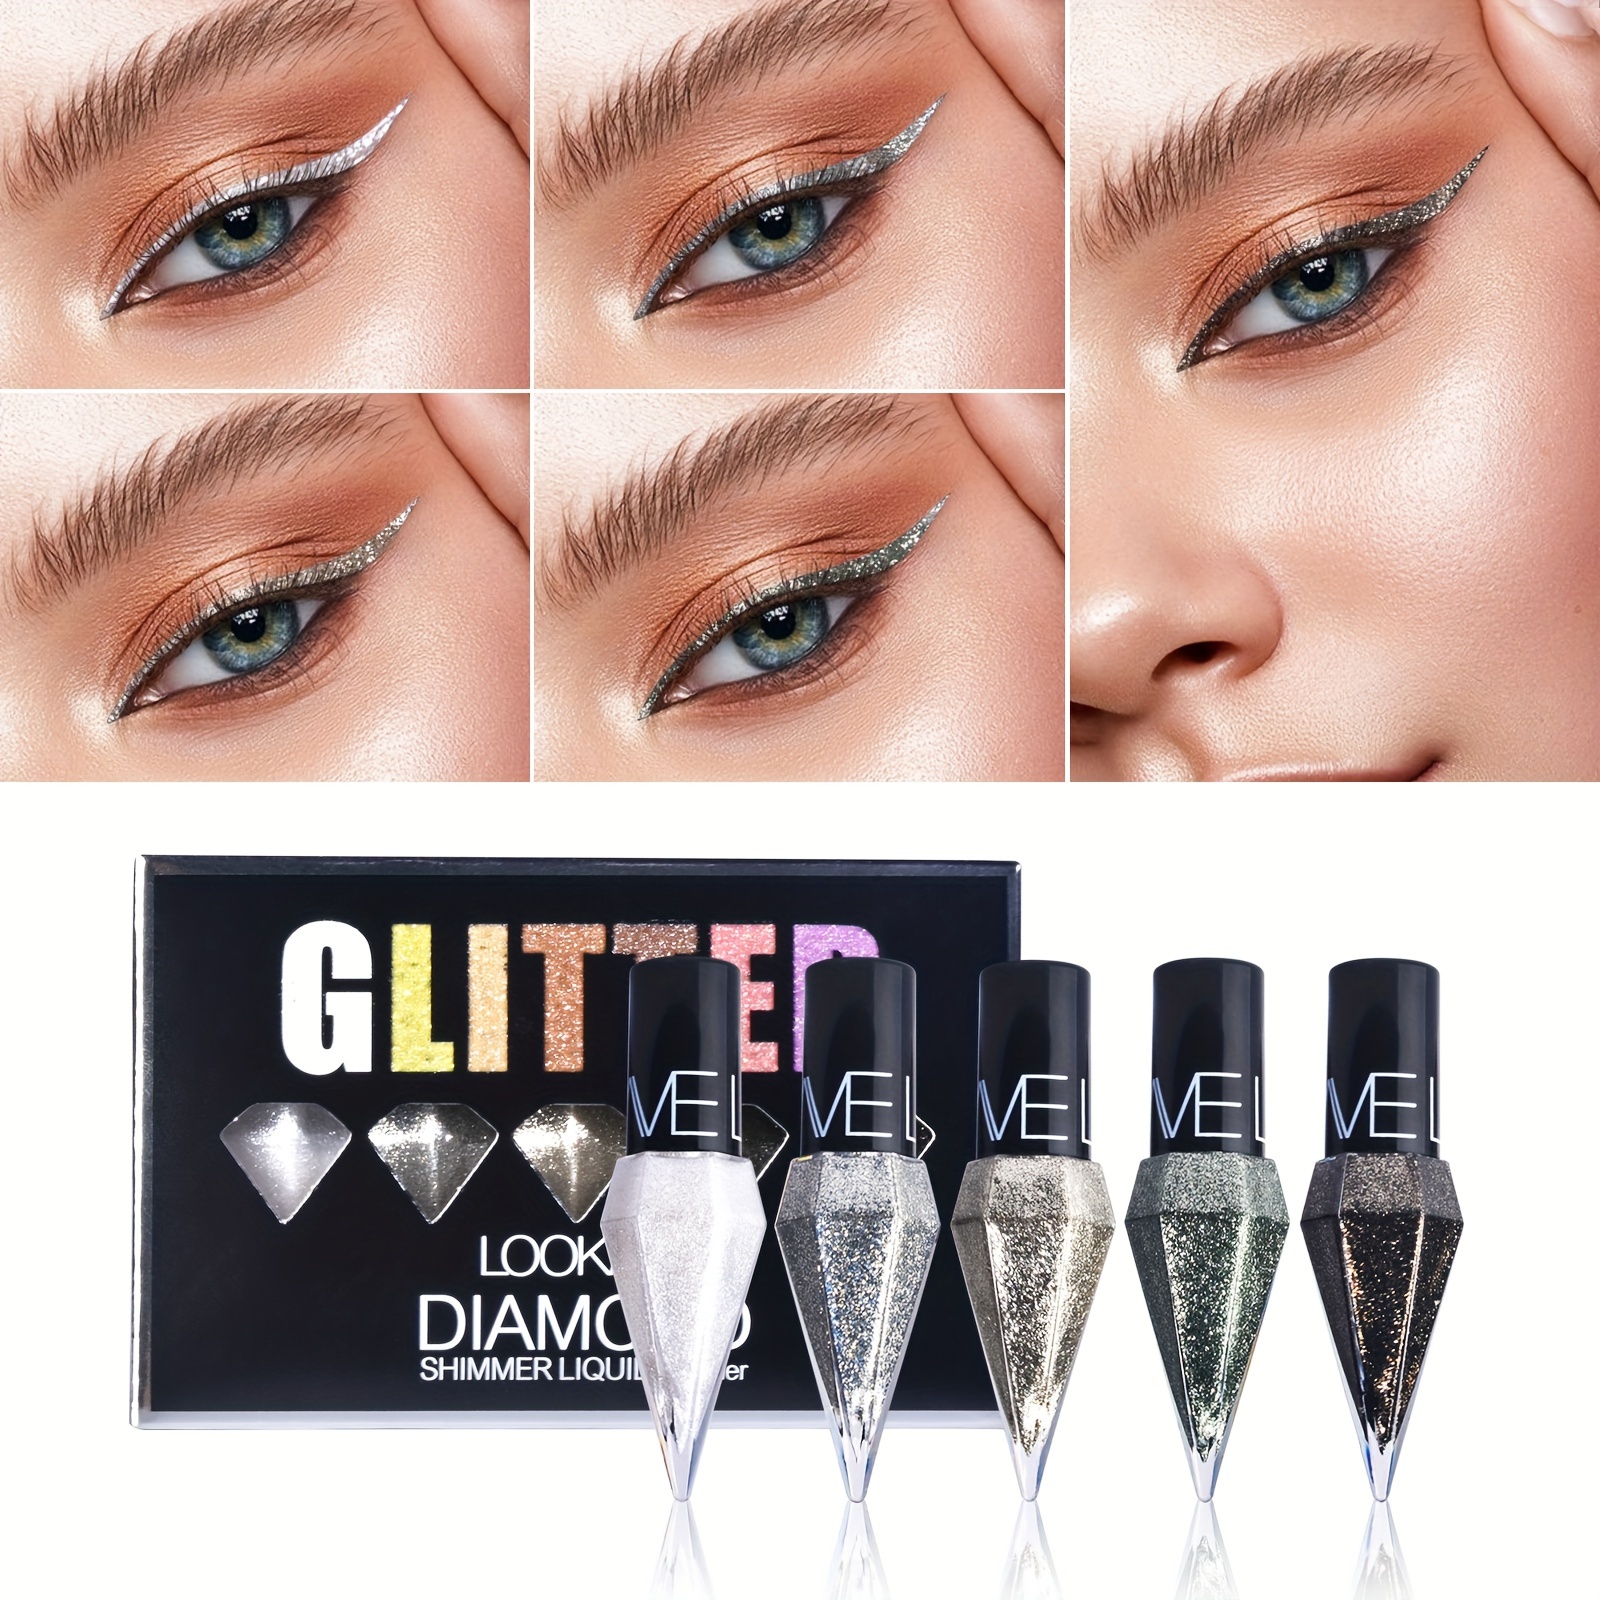 

5pc Shimmer Liquid Eyeliner Set, Waterproof, Smudge-proof, Glitter Eye Makeup With Silver And Rose Golden Sparkles, Eye Shadow Stick Combo For Cosmetics For Music Festival